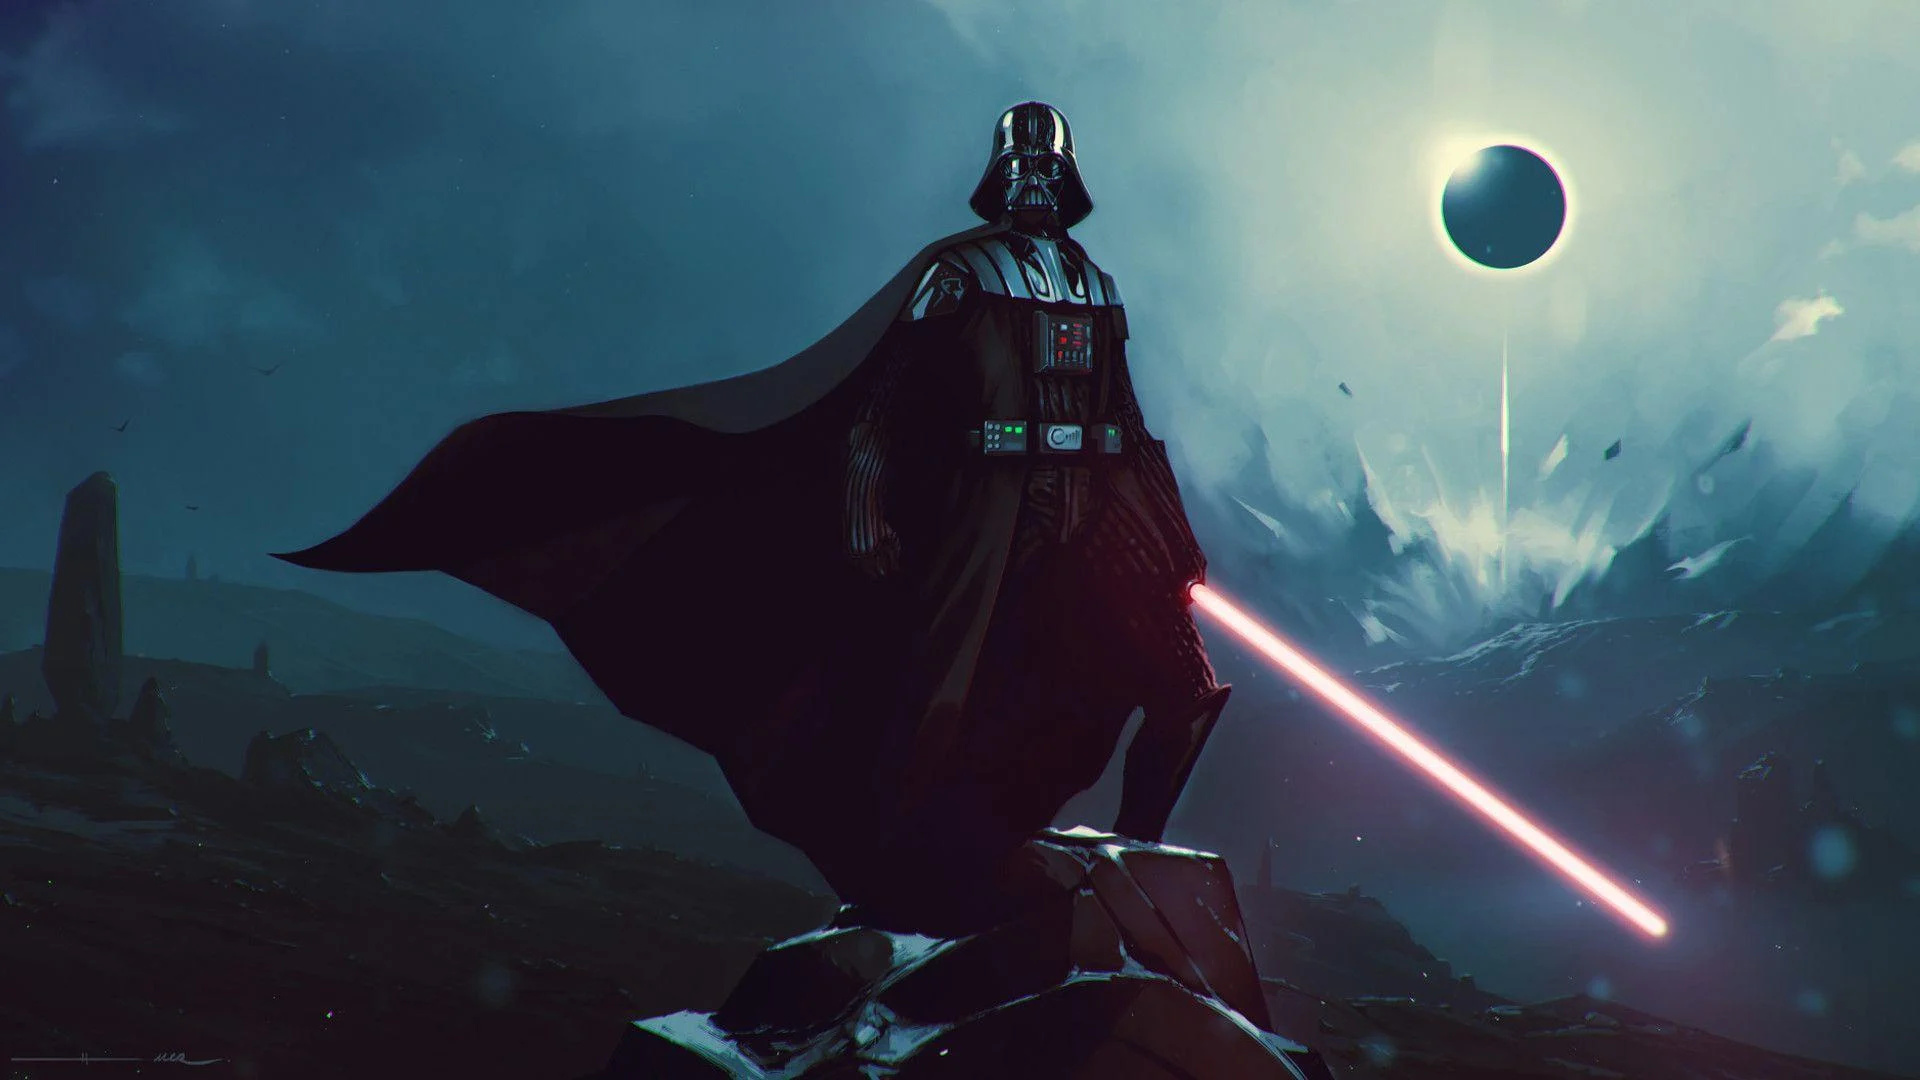 Darth Vader: Known for his iconic black armor, helmet, and heavy breathing. 1920x1080 Full HD Wallpaper.